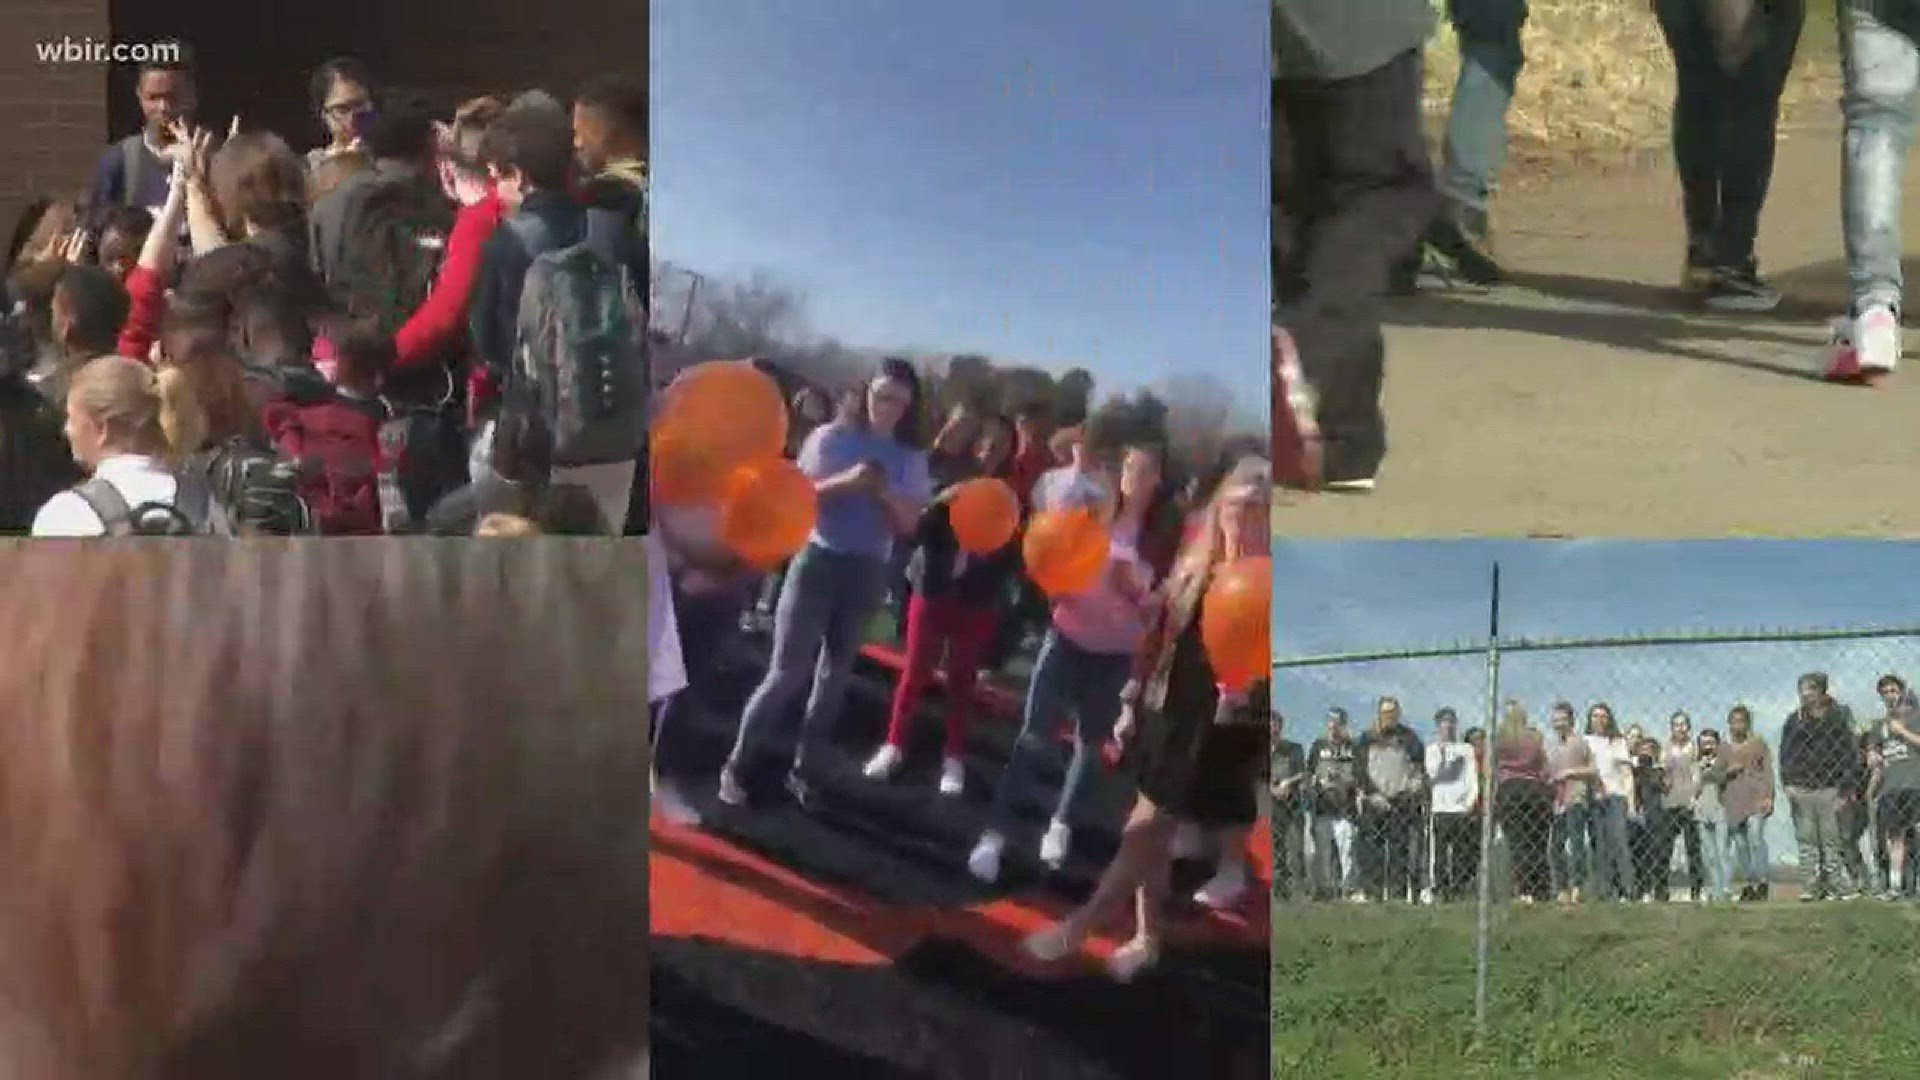 Kids from five schools held demonstrations on Friday to remember school shooting victims and ask for change.